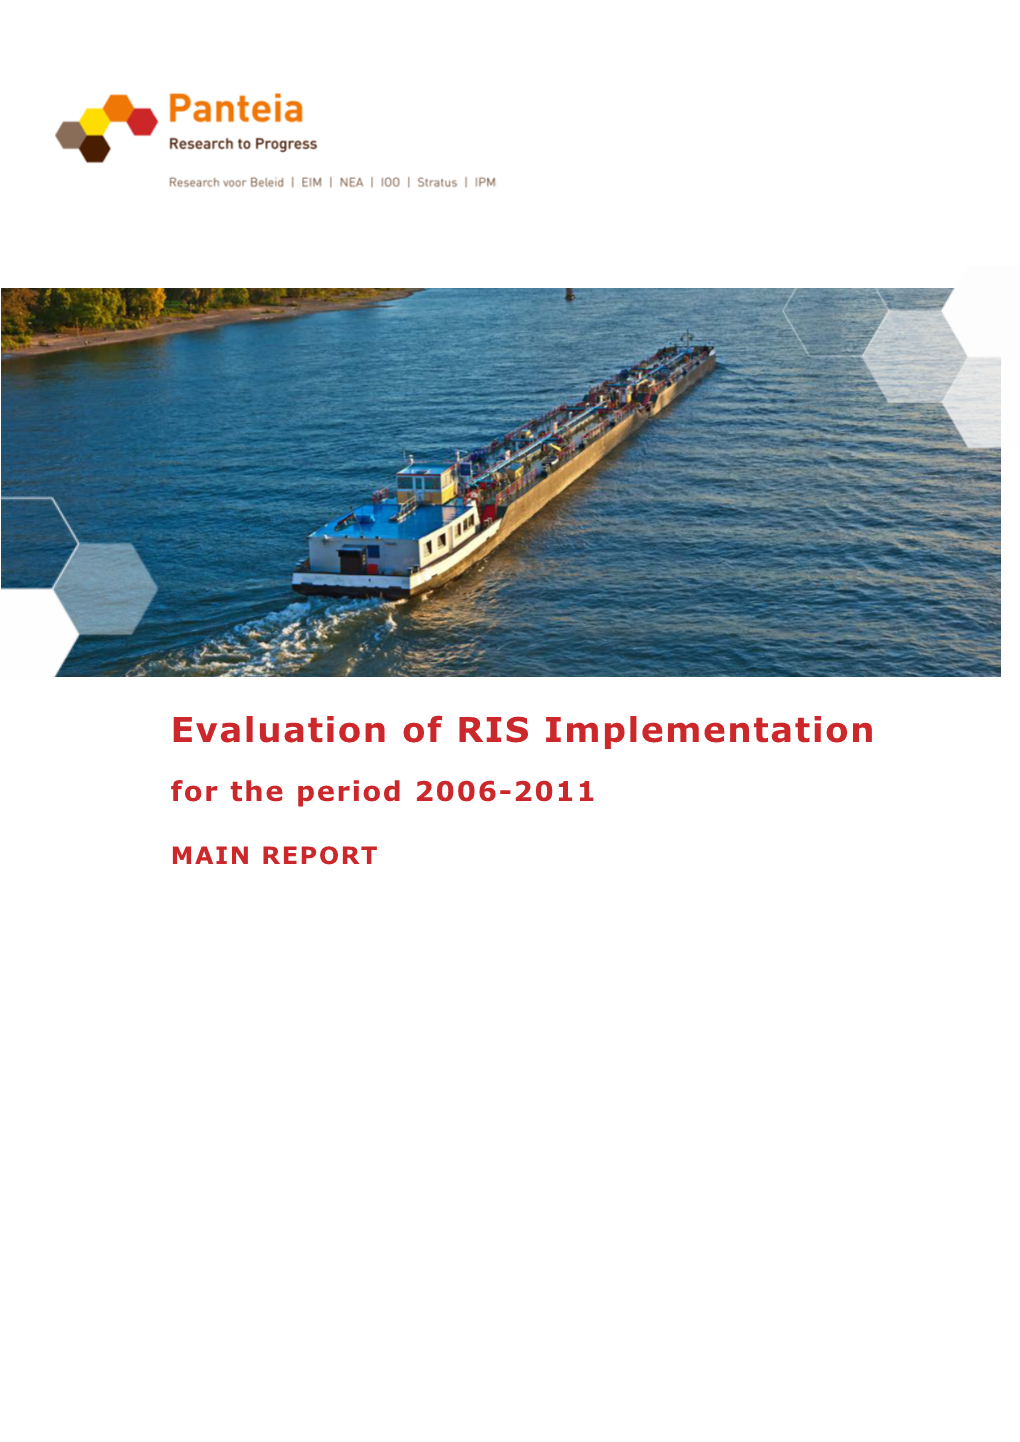 Evaluation of RIS Implementation for the Period 2006-2011